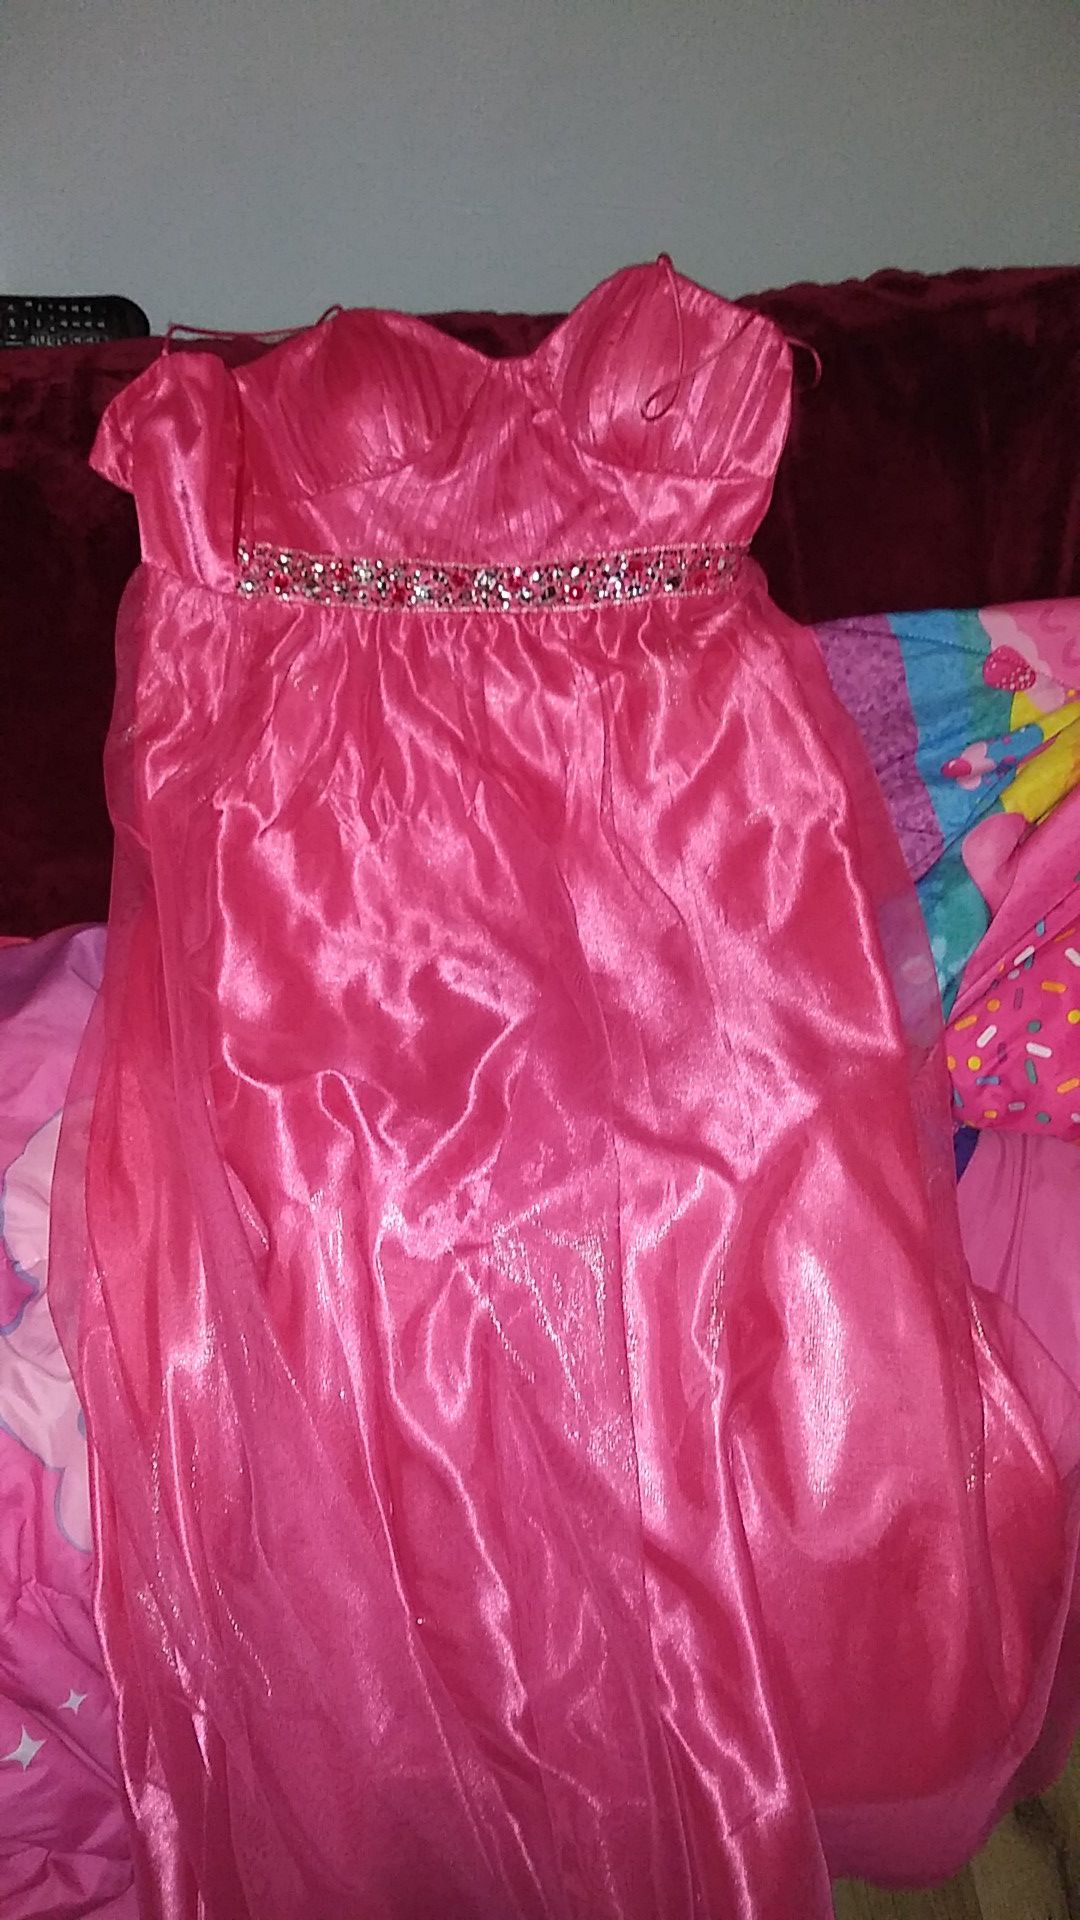 My daughter only wore it once for a dance at school nothing wrong with it